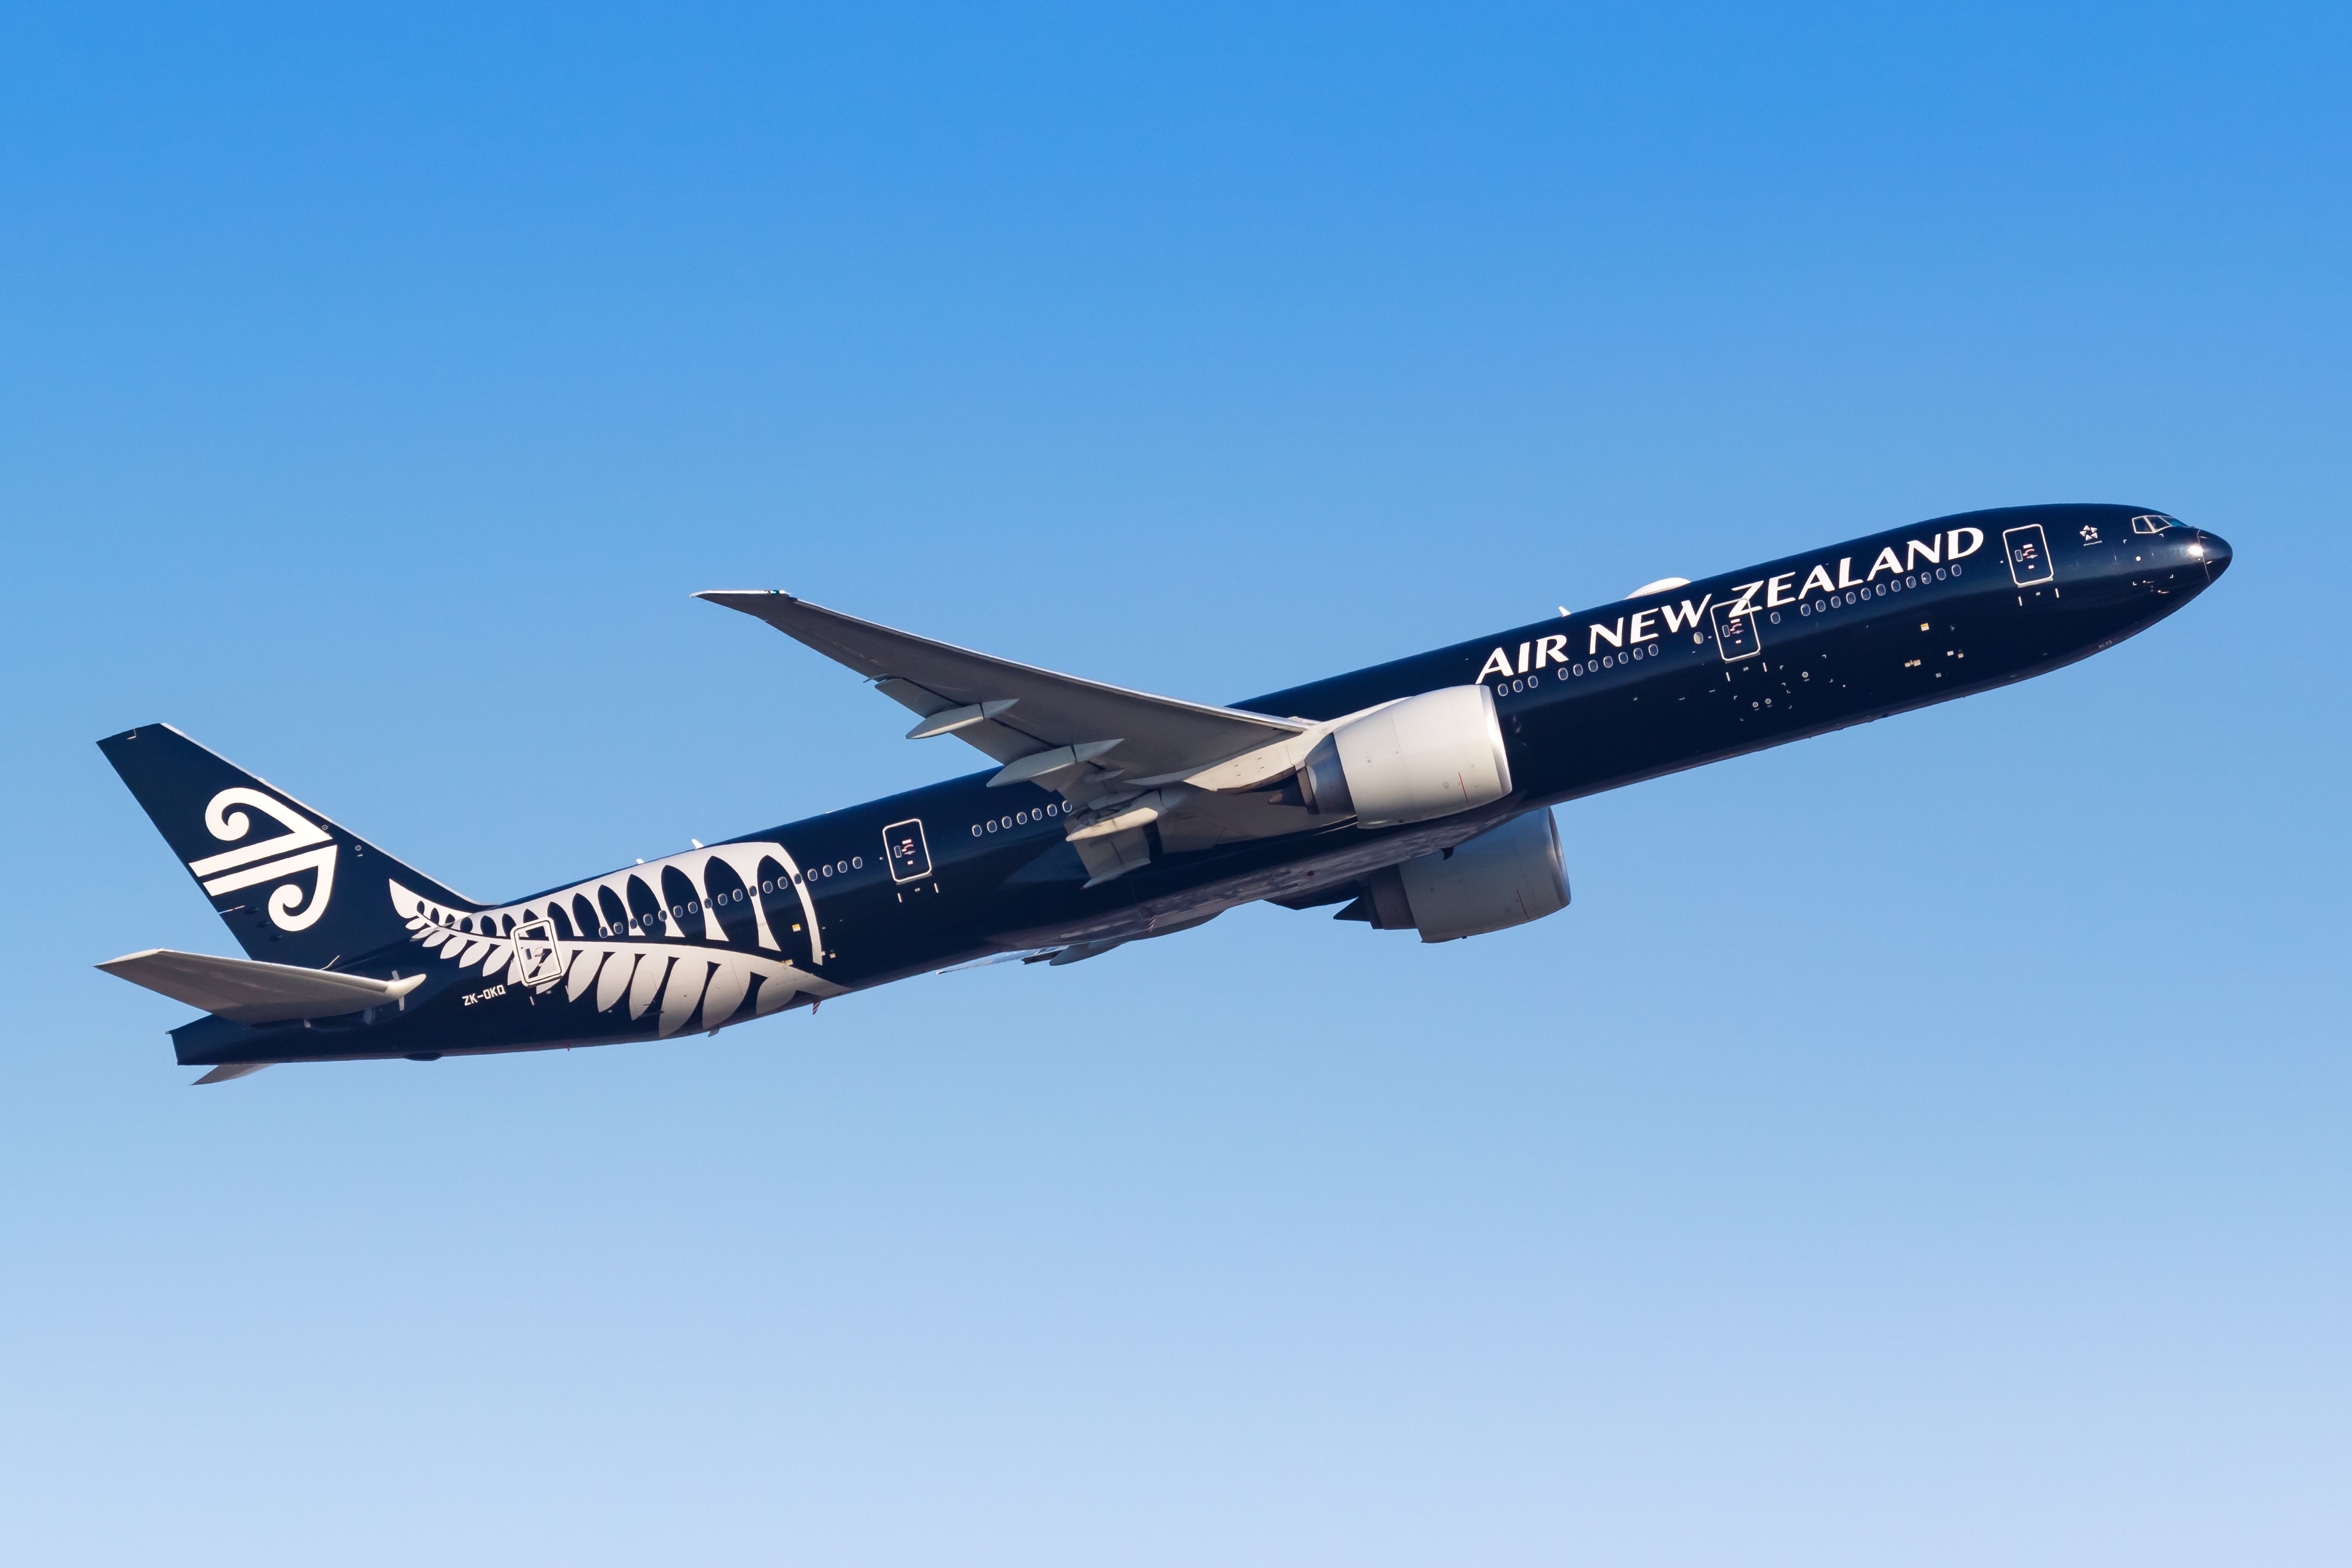 An Air New Zealand Boeing 777-300ER flying in the sky.